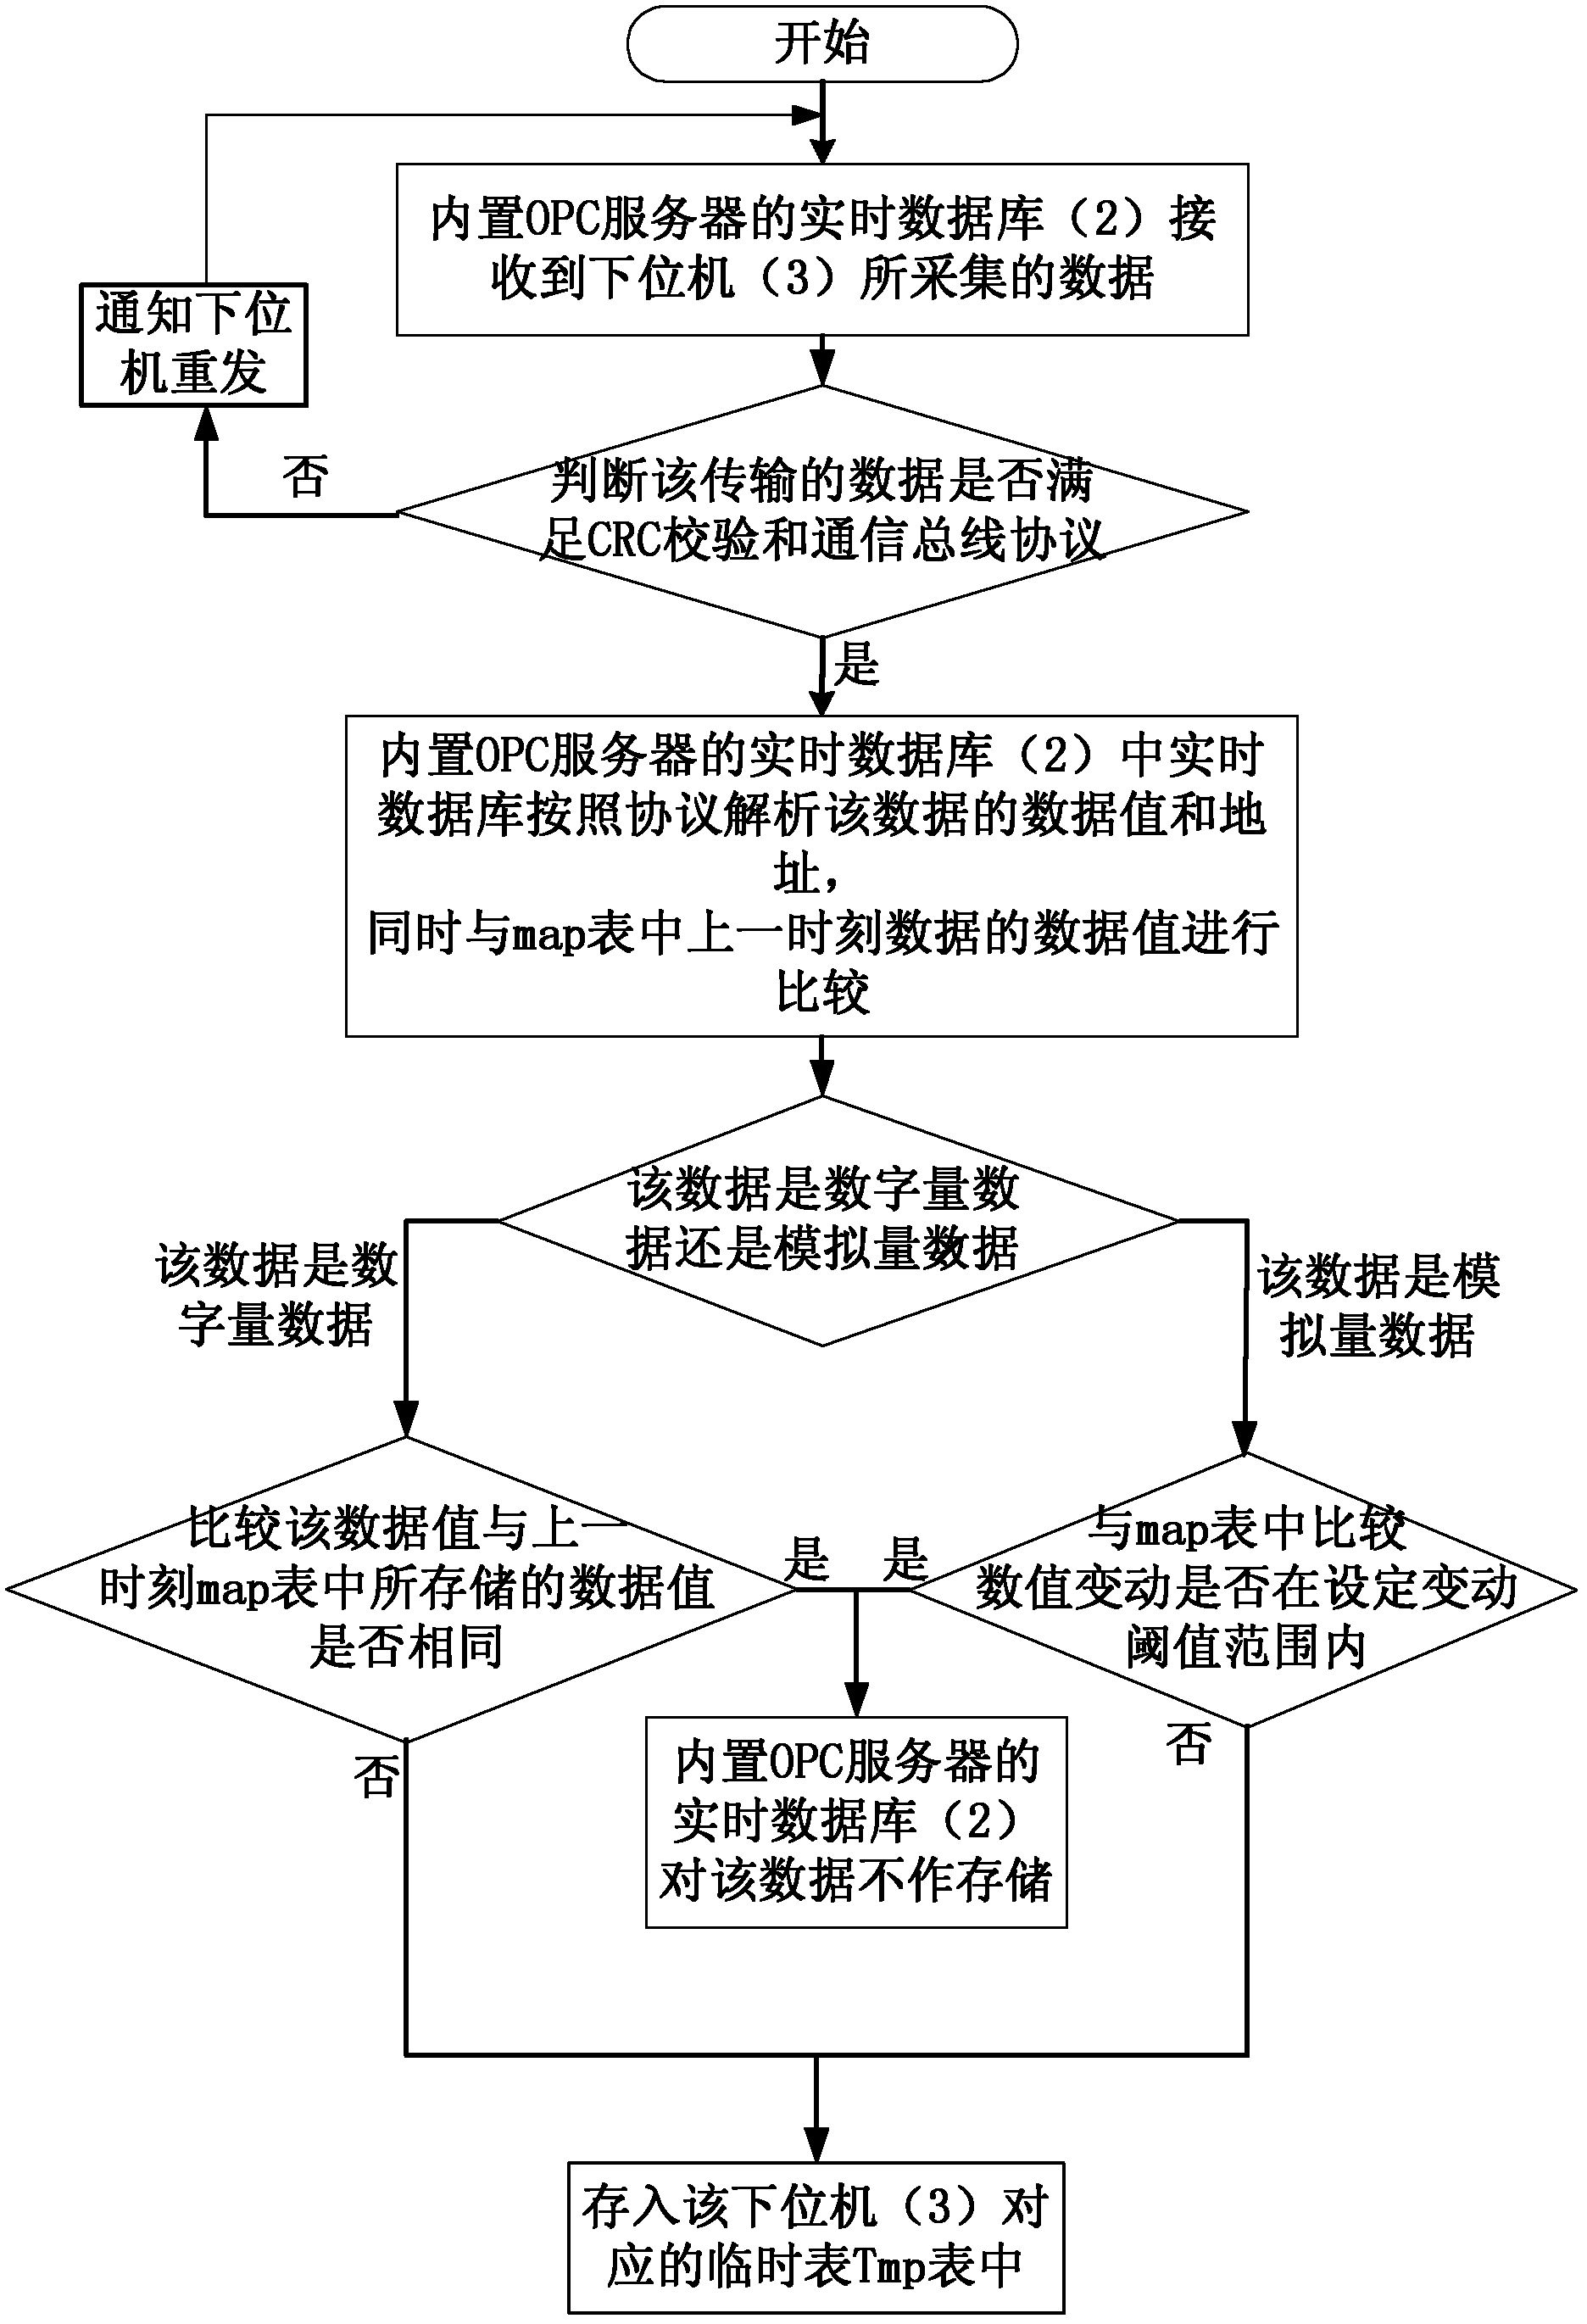 Device for realizing real-time updating of database and data real-time updating method in boiler control based on OPC (OLE for Process Control) server